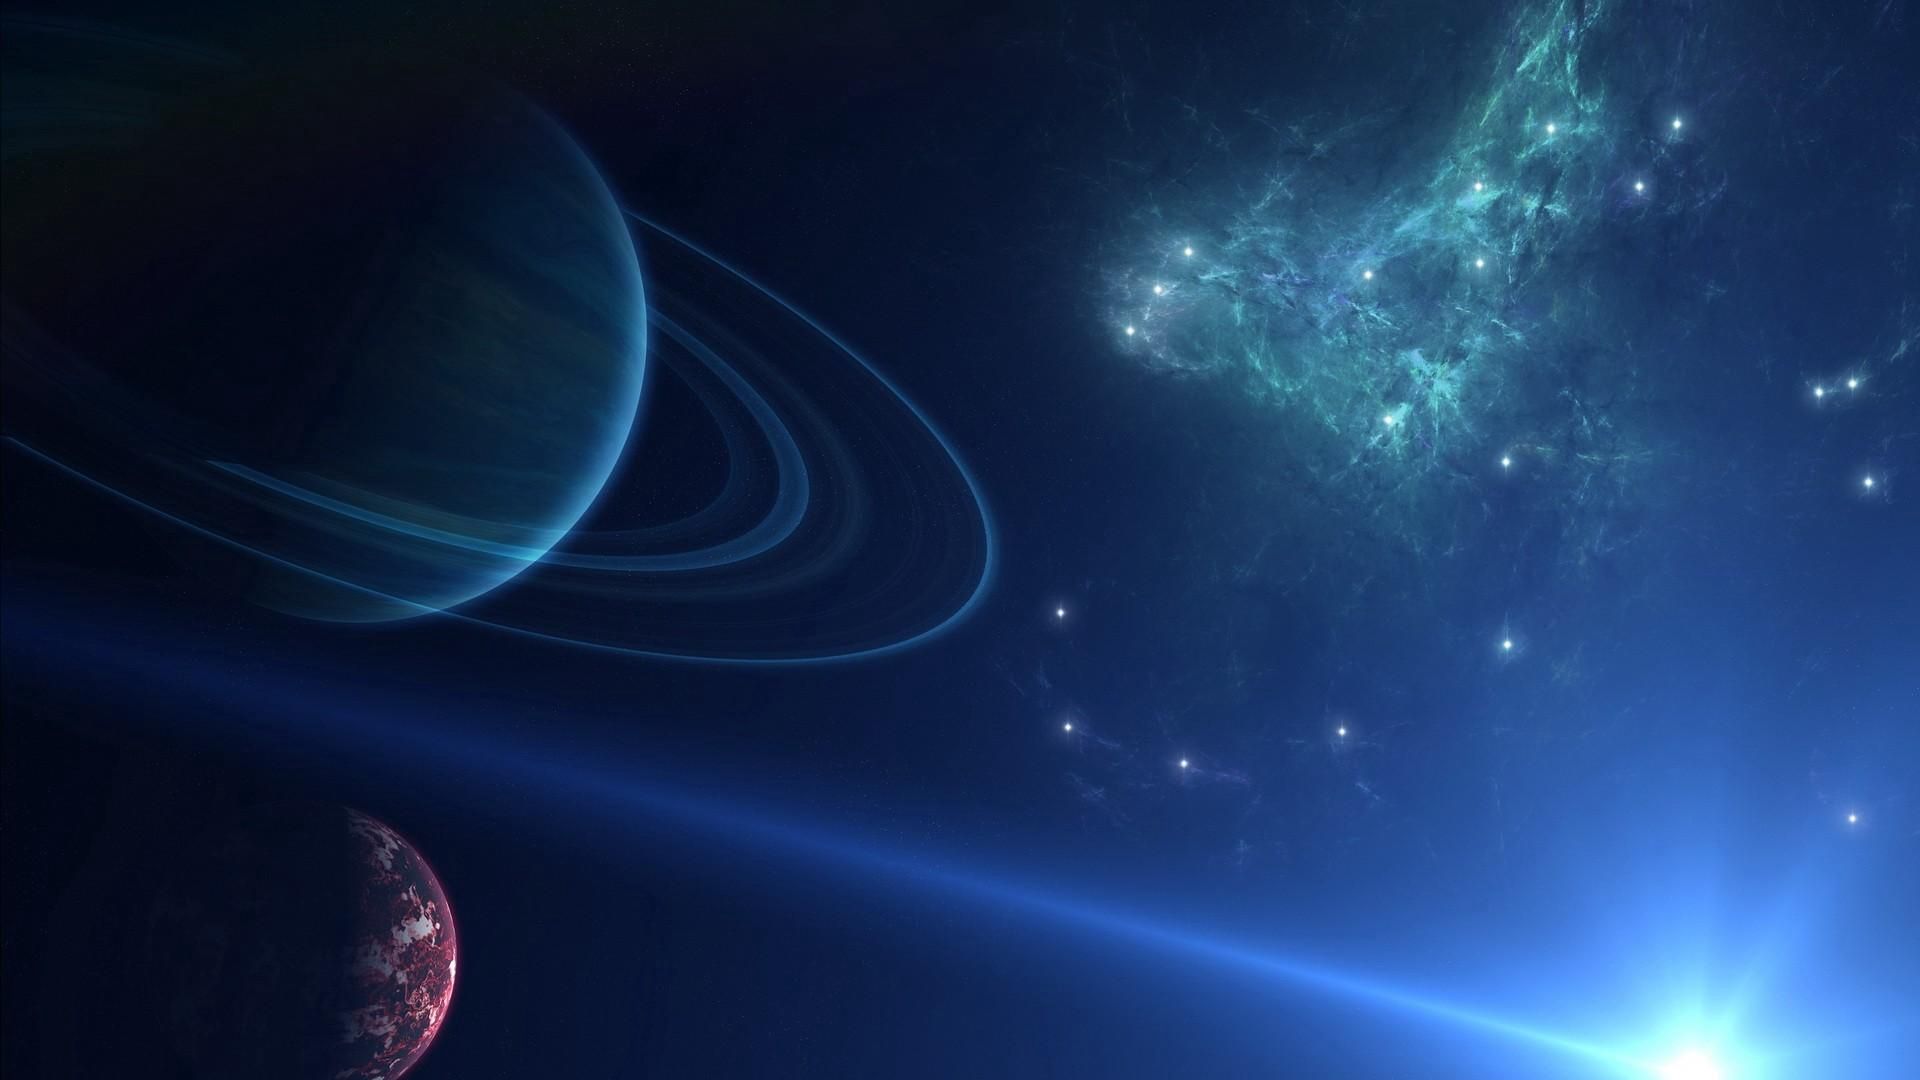 Download wallpaper 1920x1080 planet, space, galaxy, rays full hd, hdtv ...